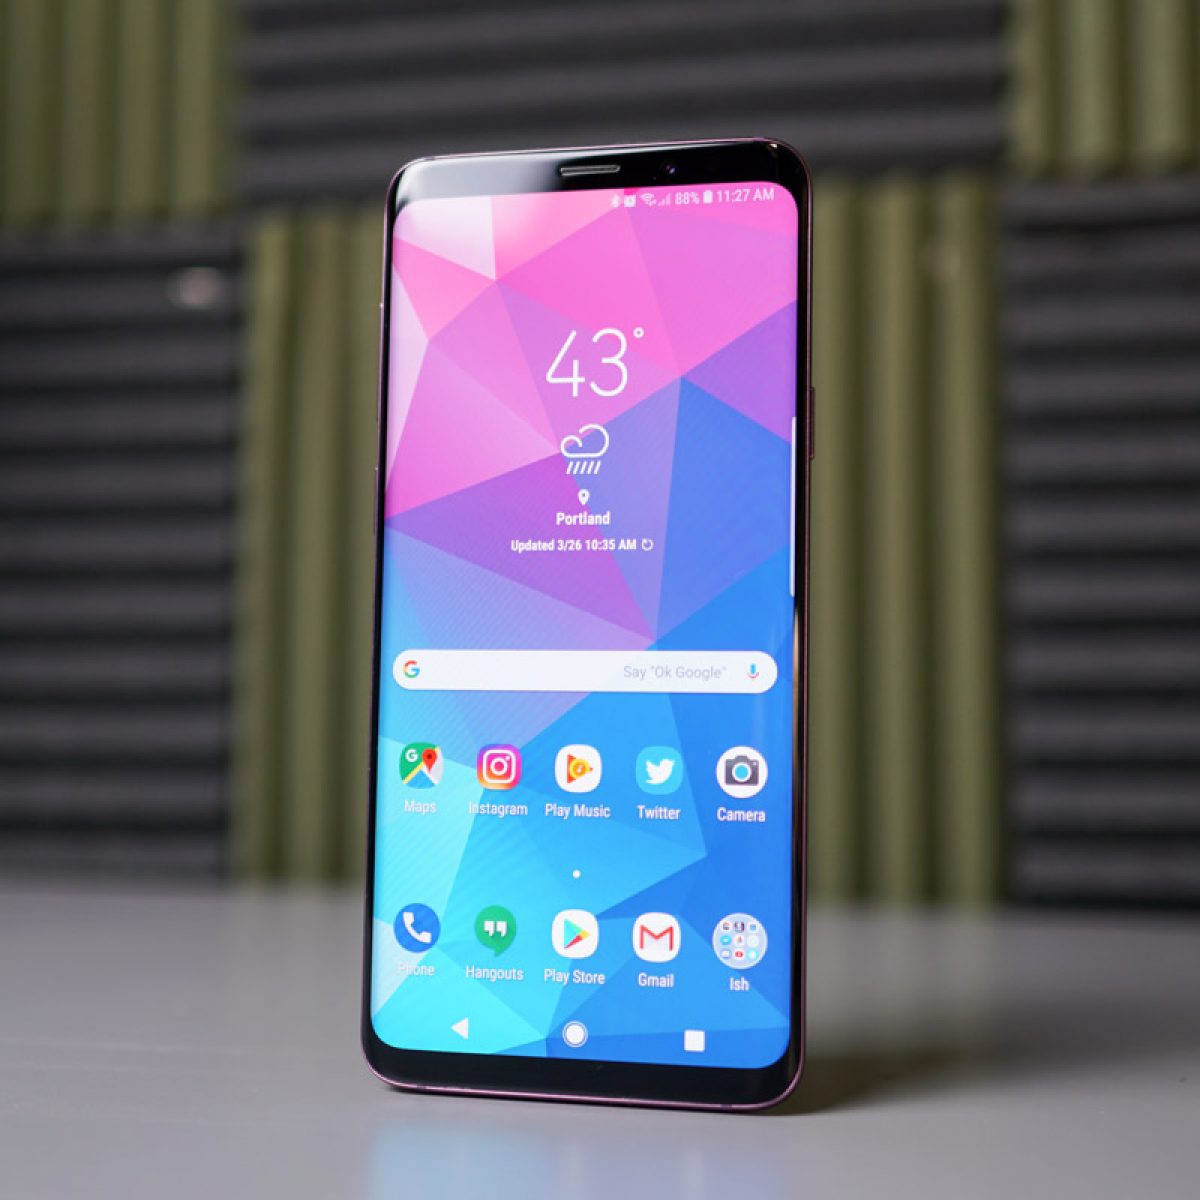 Samsung Galaxy S9 Review: The Price is Right